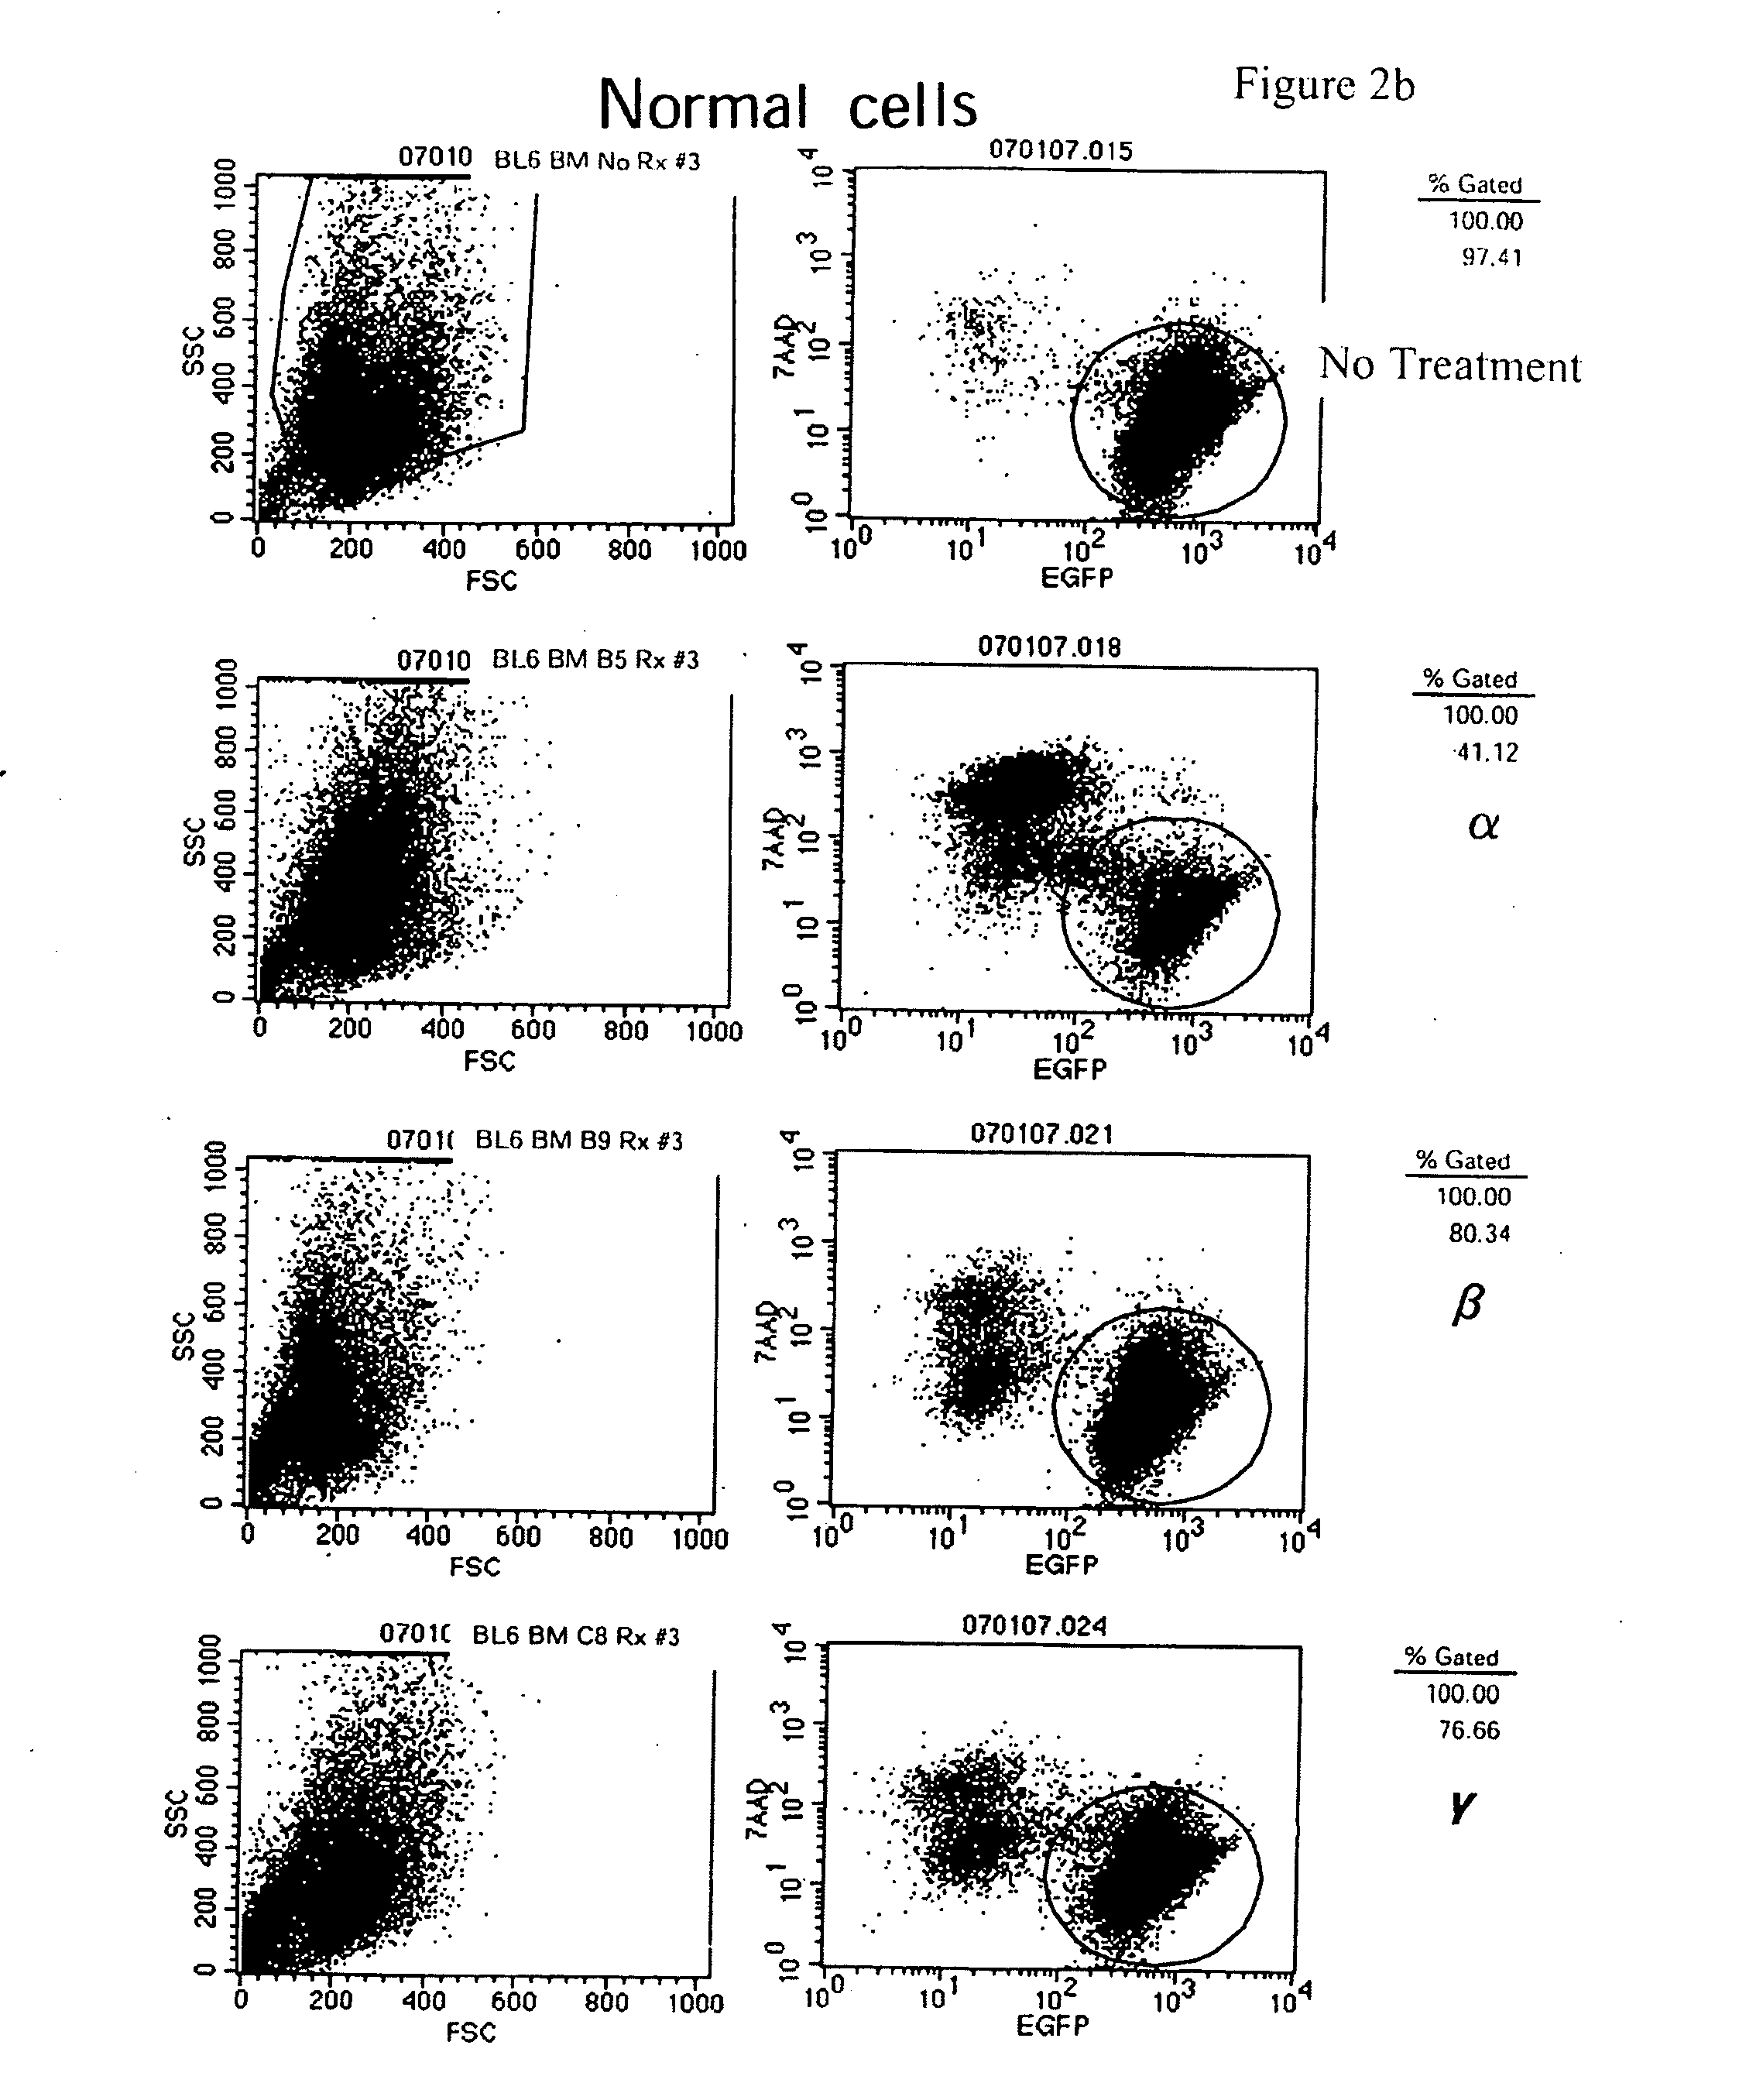 Compounds for treating abnormal cellular proliferation